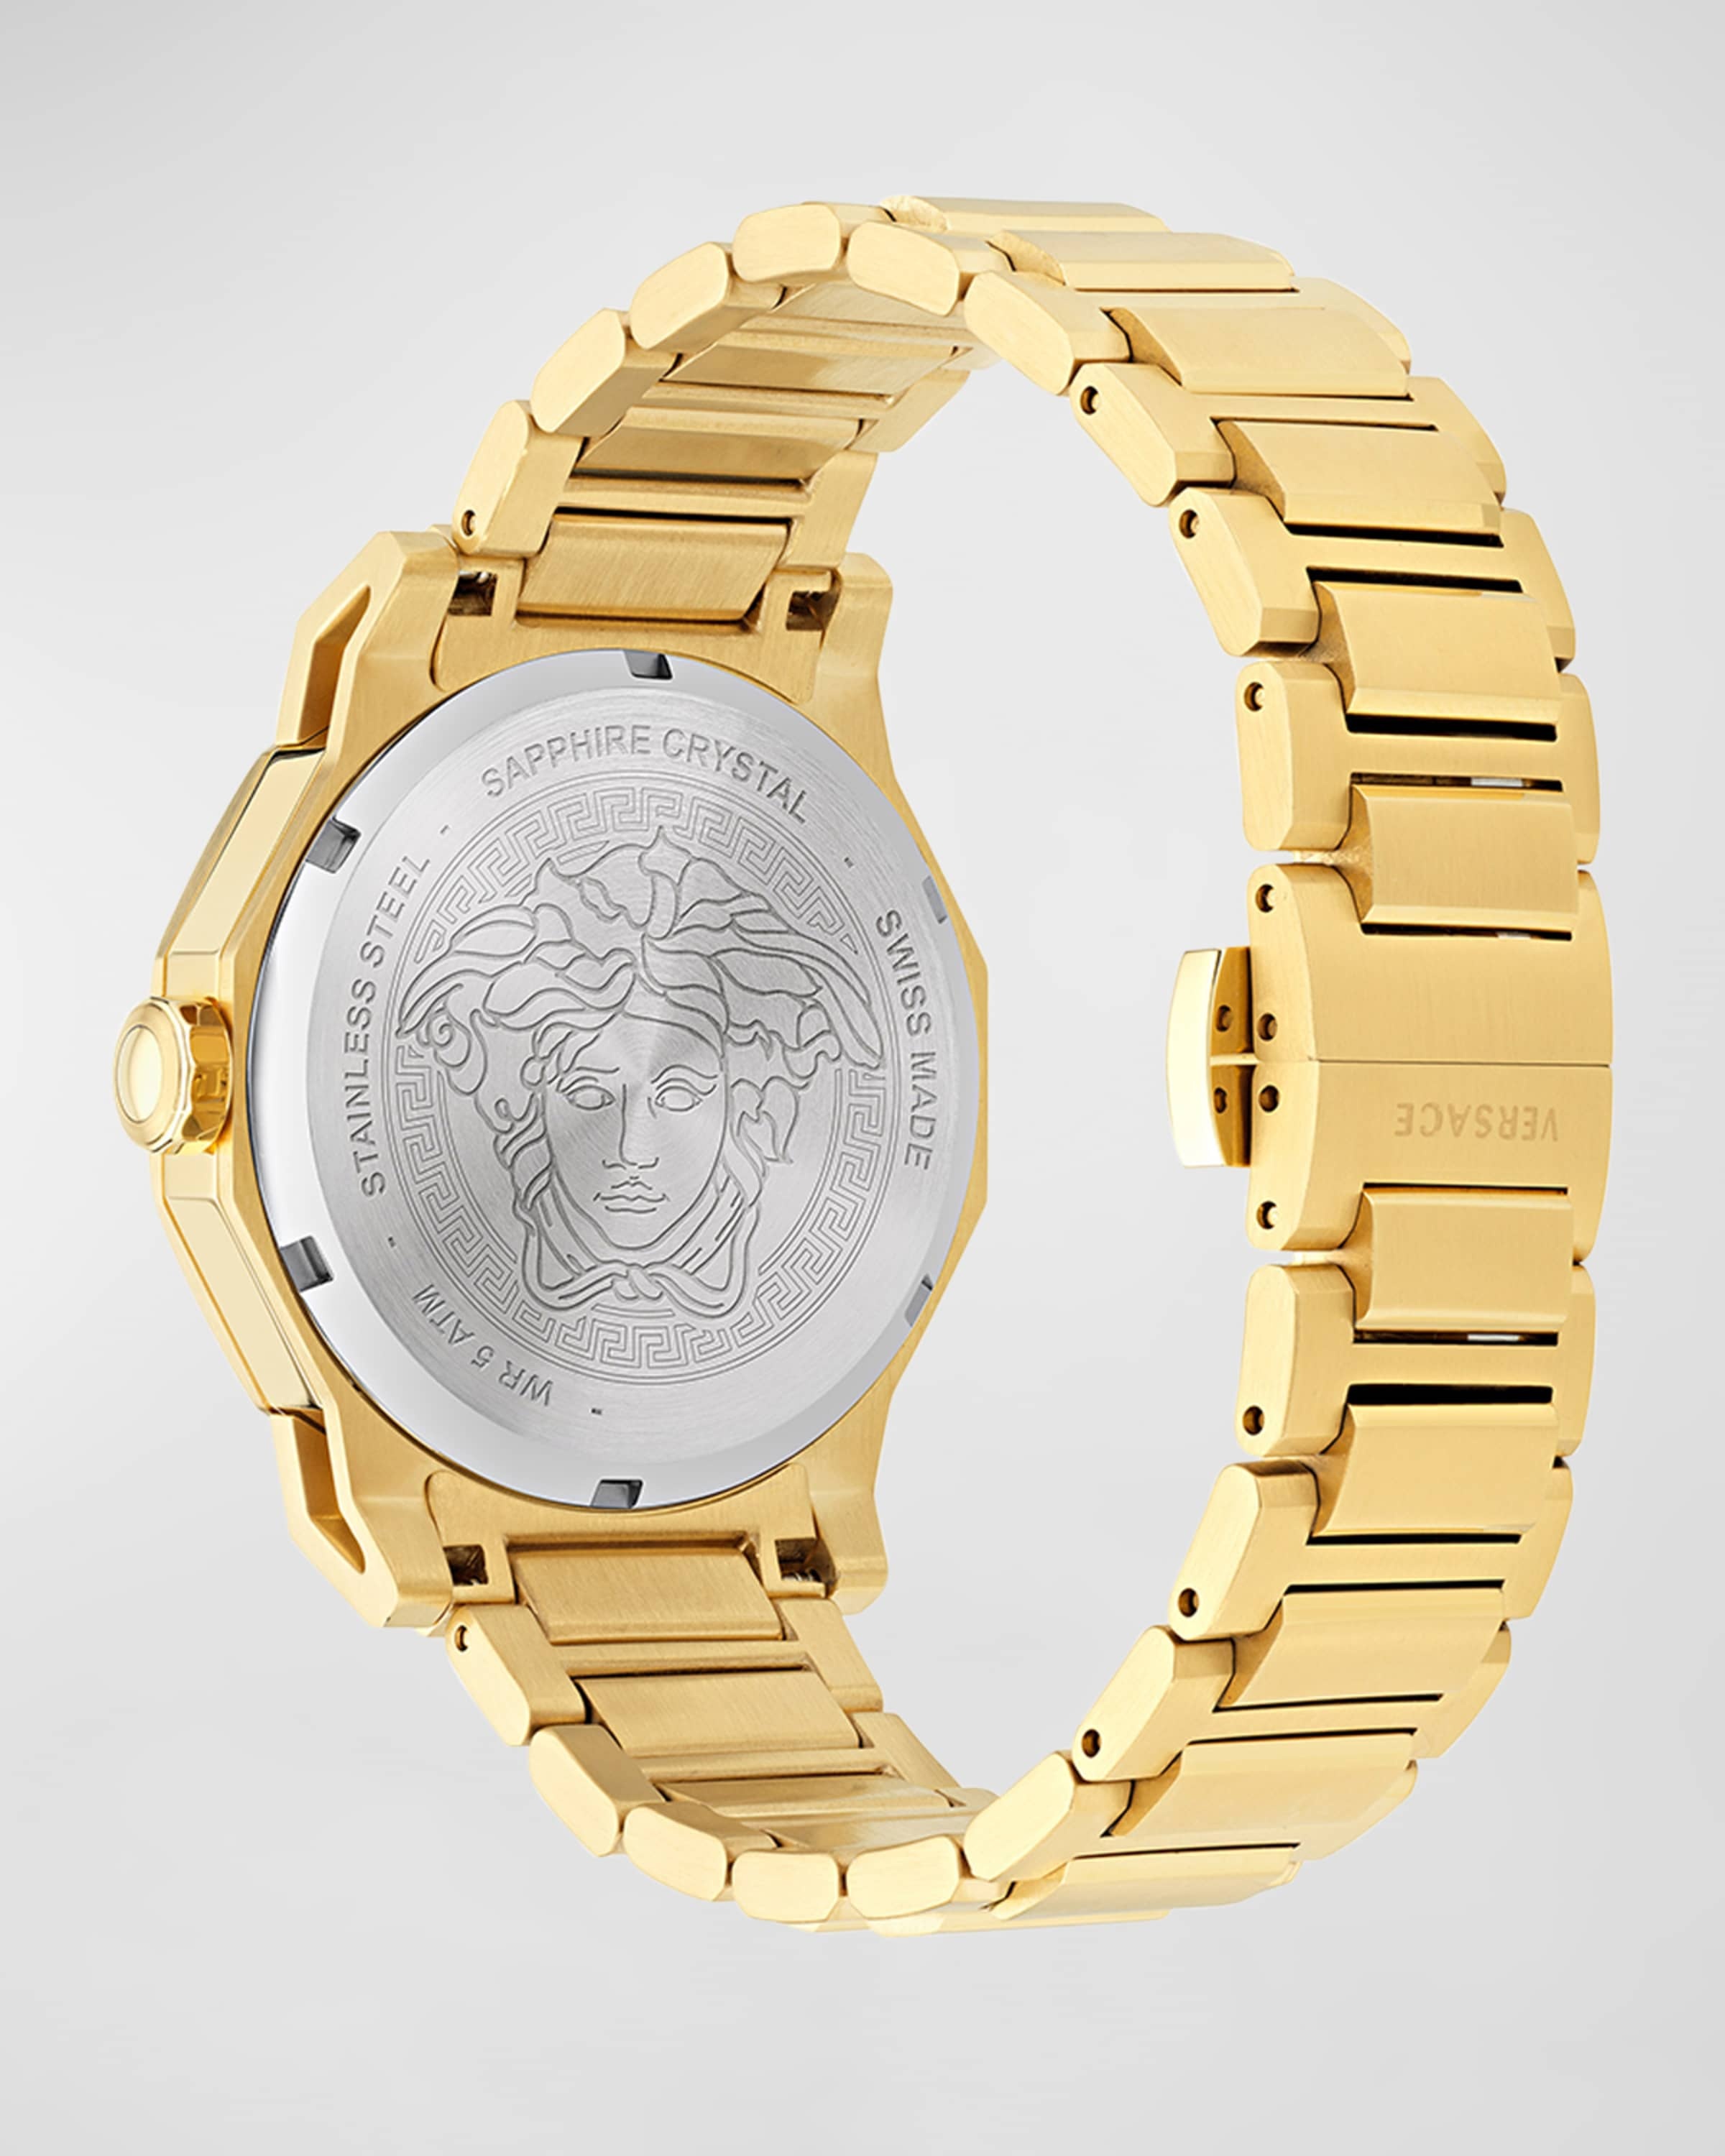 38mm Medusa Deco Watch with Bracelet Strap, Gold Plated - 4